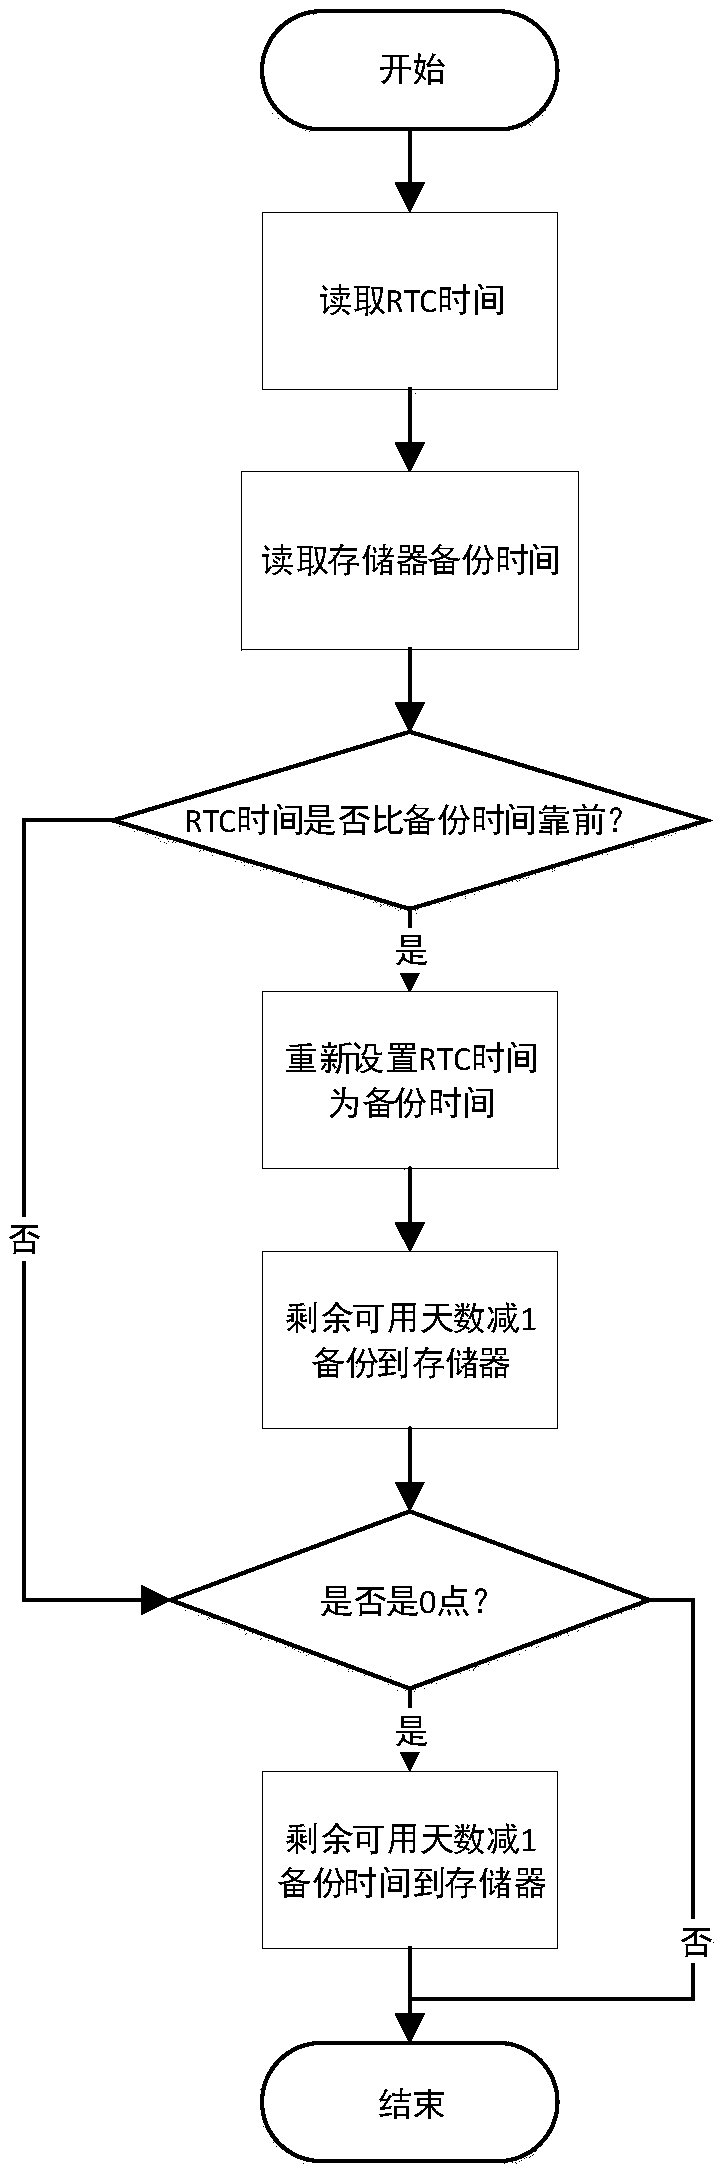 Embedded software encryption registration method combining with embedded equipment